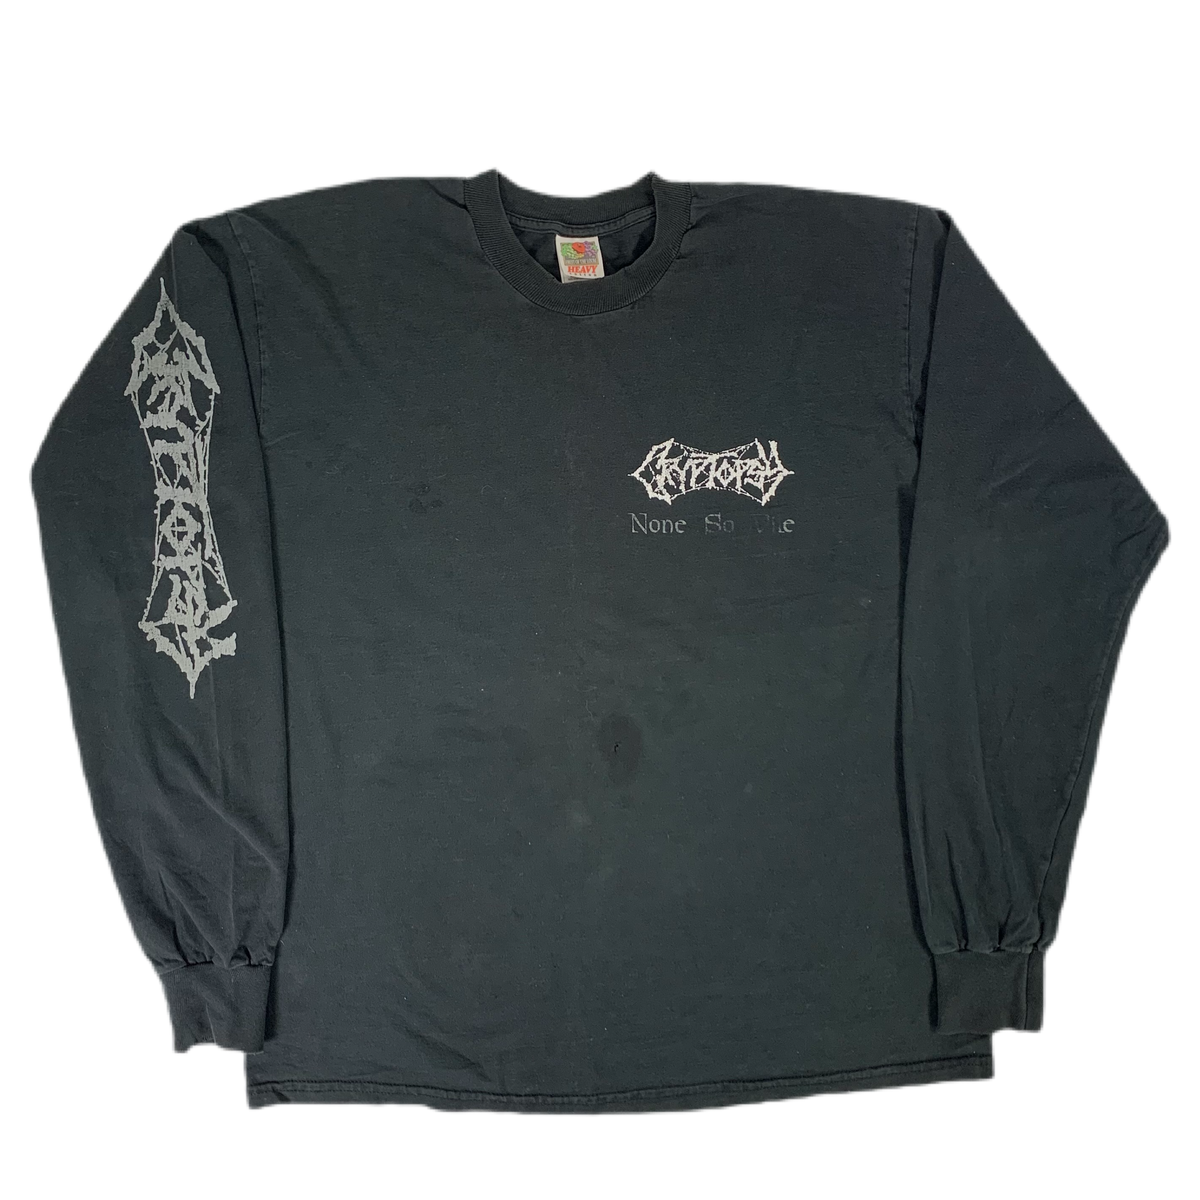 Vintage Cryptopsy &quot;None So Vile&quot; Long Sleeve Shirt